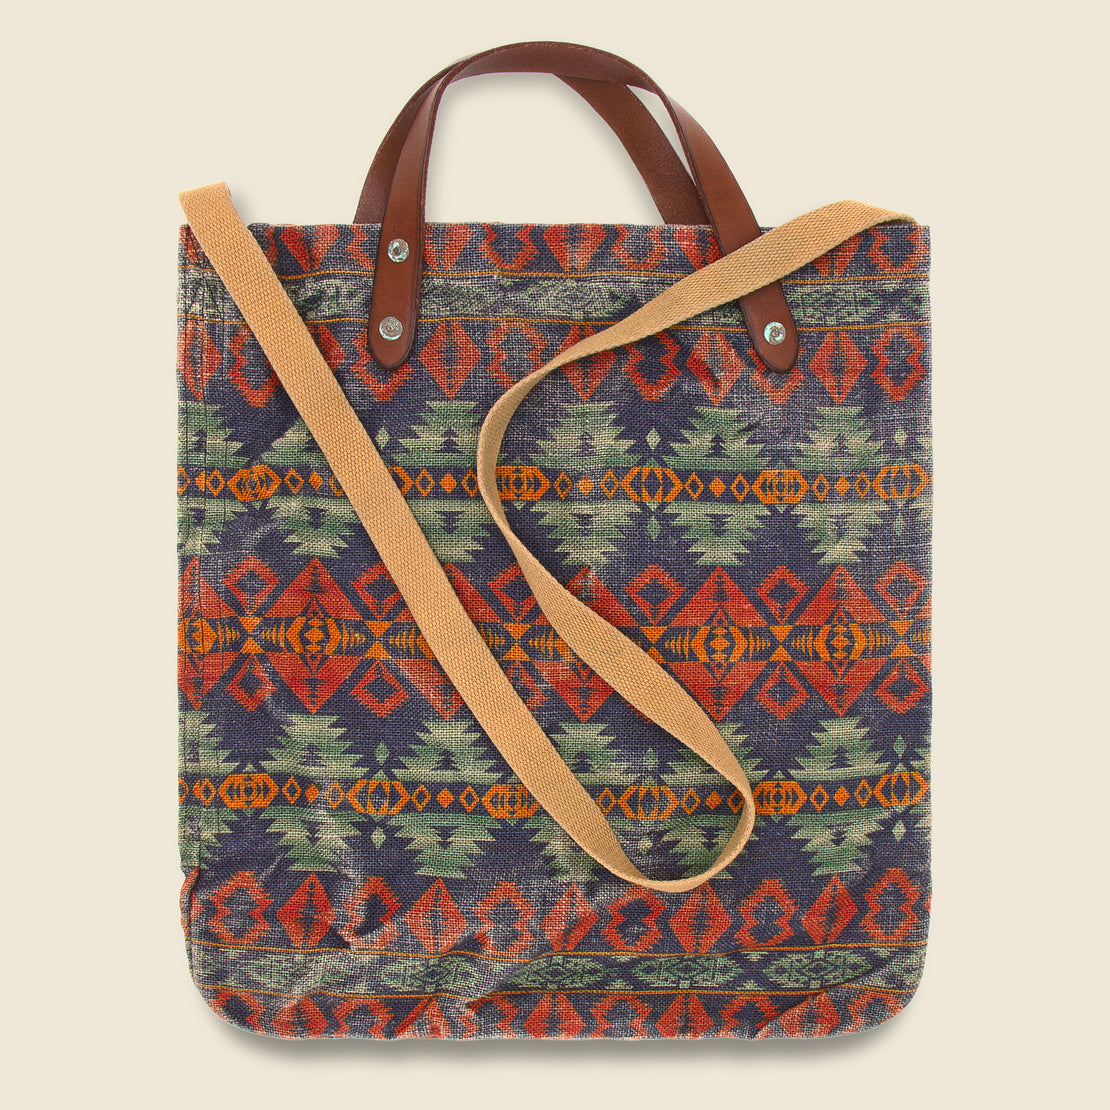 Market Tote - Navy/Red Multi - RRL - STAG Provisions - Accessories - Bags / Luggage